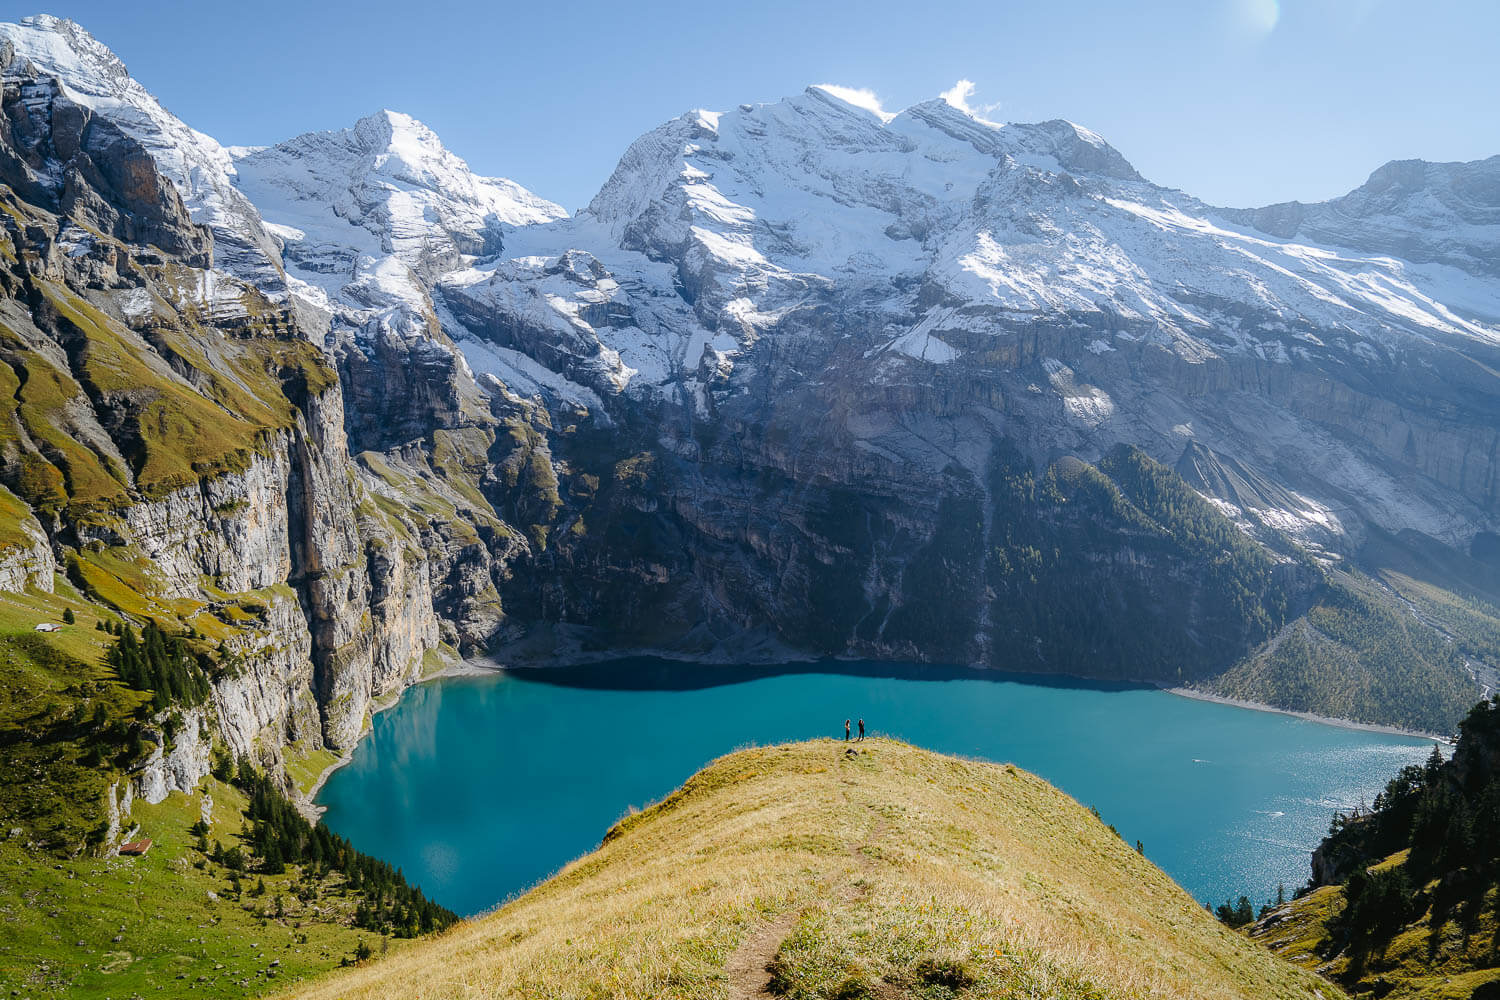 The amazing viewpoints, and photo spots on the Oeschinensee Panorama Trail